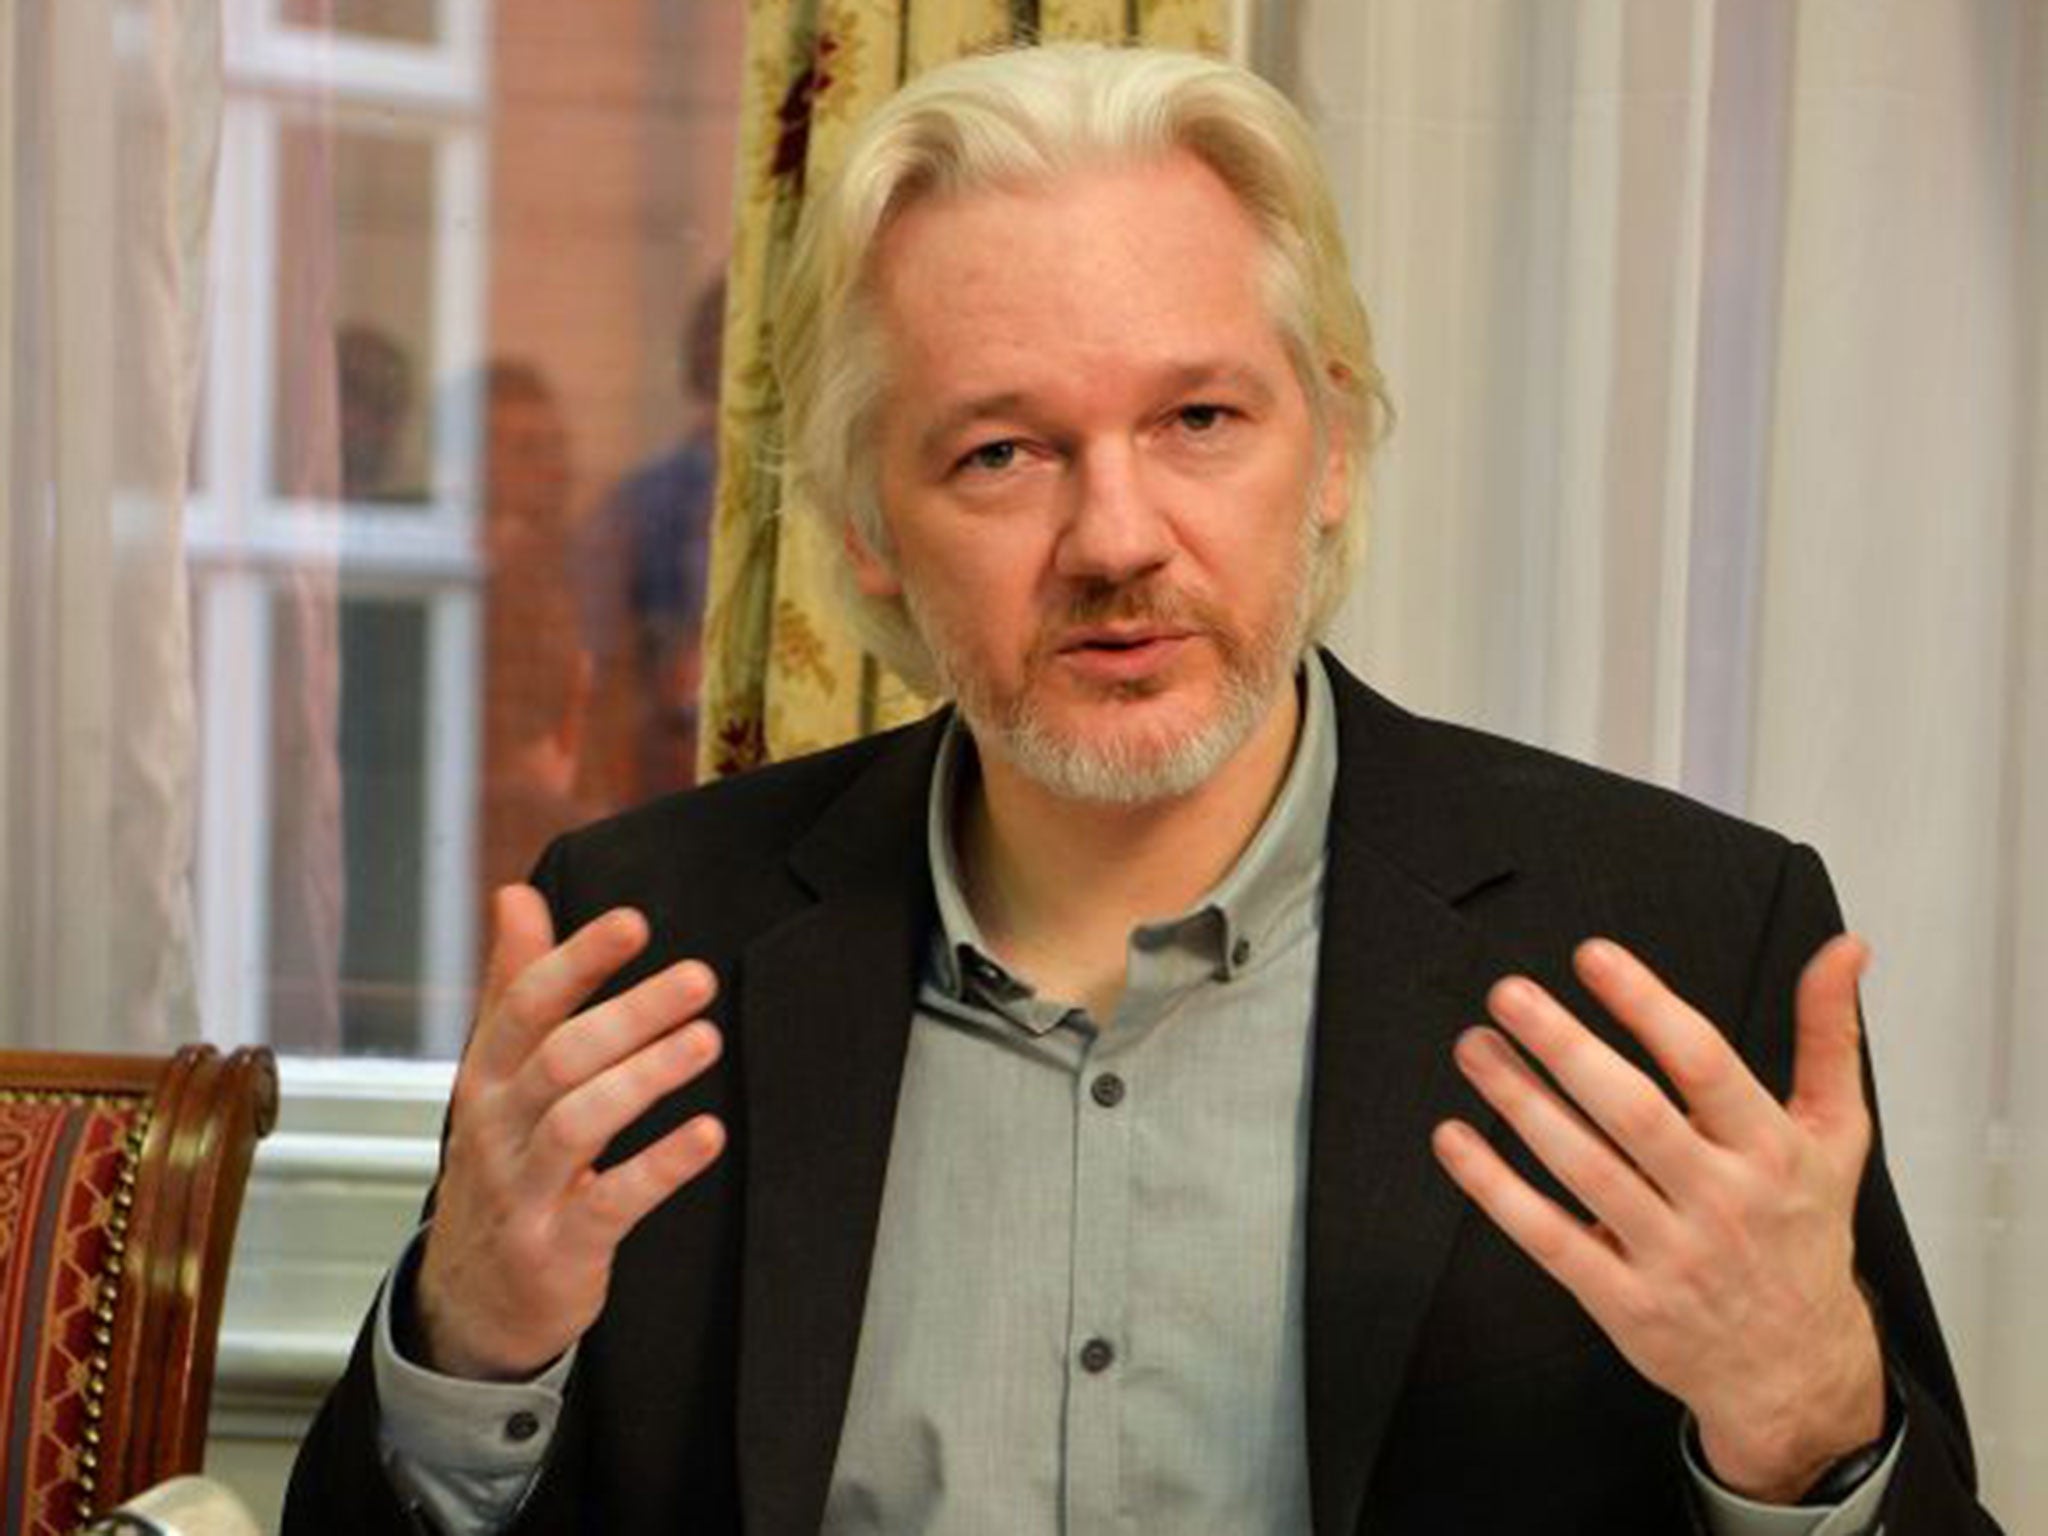 Assange has not confirmed any rumours about his health